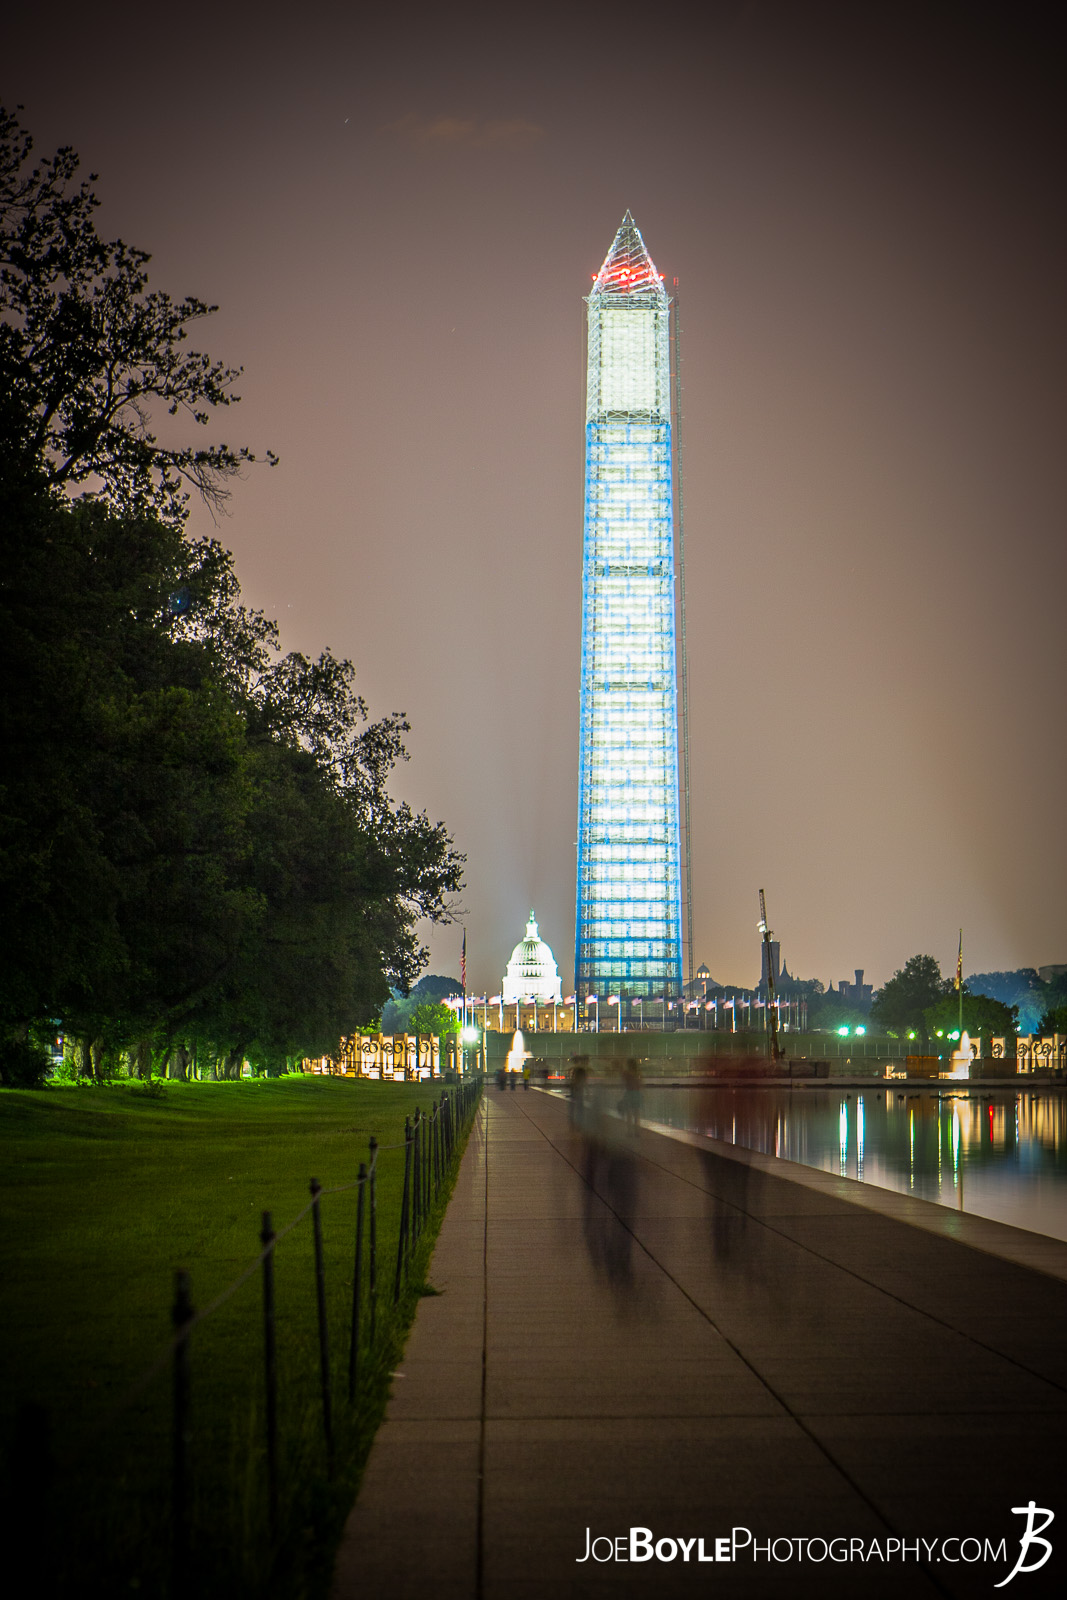  While I was in Washington, DC I was able to take some great night images of a few of the iconic landmarks that make up this city! Including the Washington Monument! 